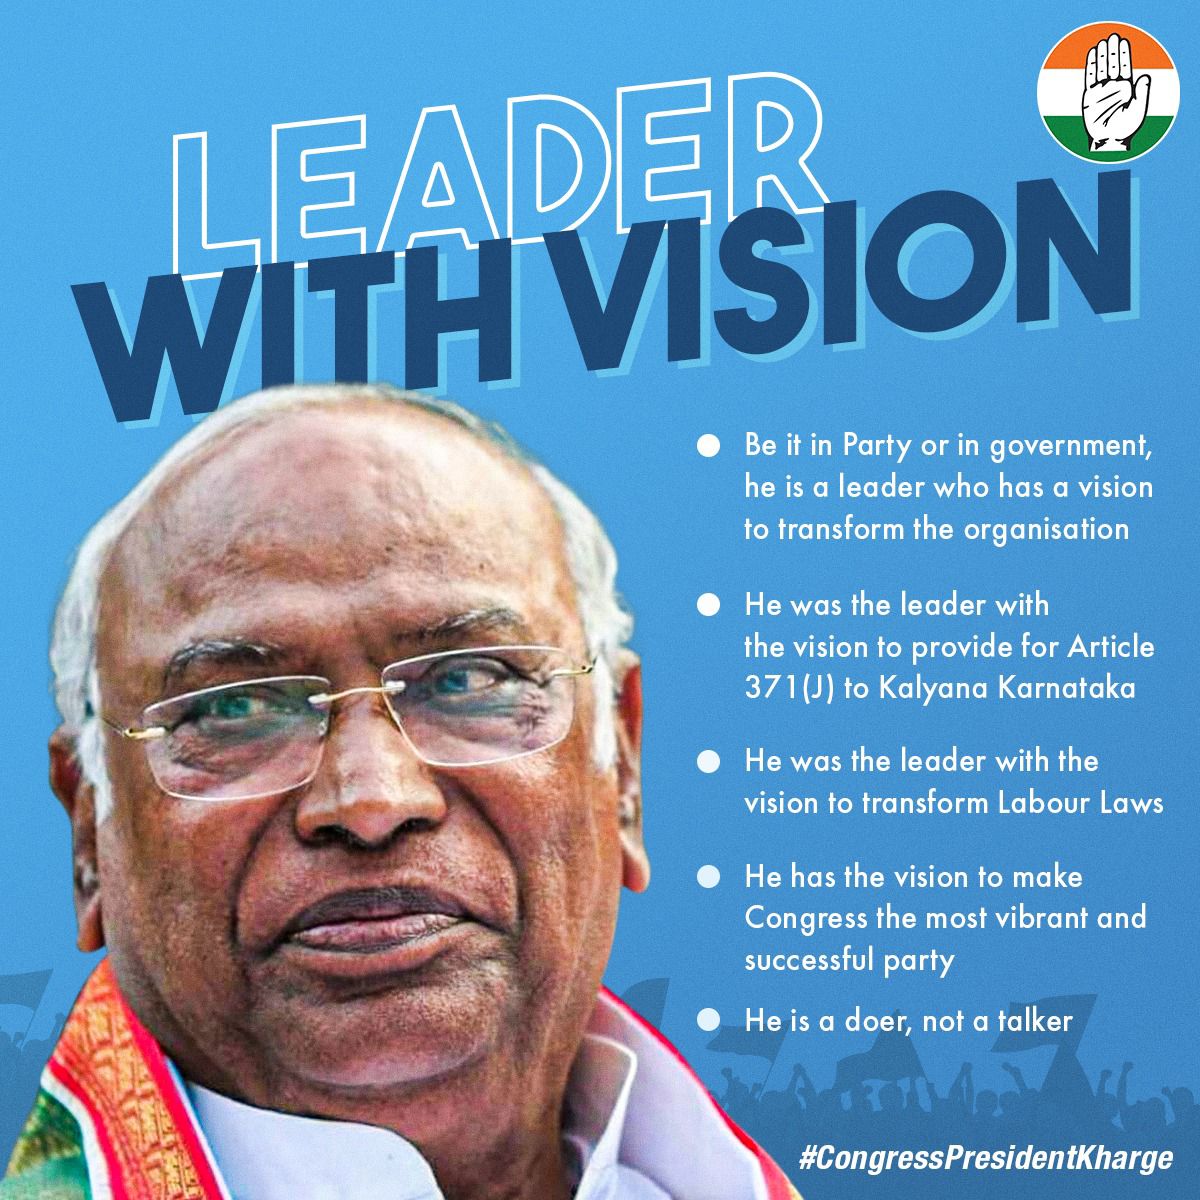 Leader With Vision
#CongressPresidentKharge